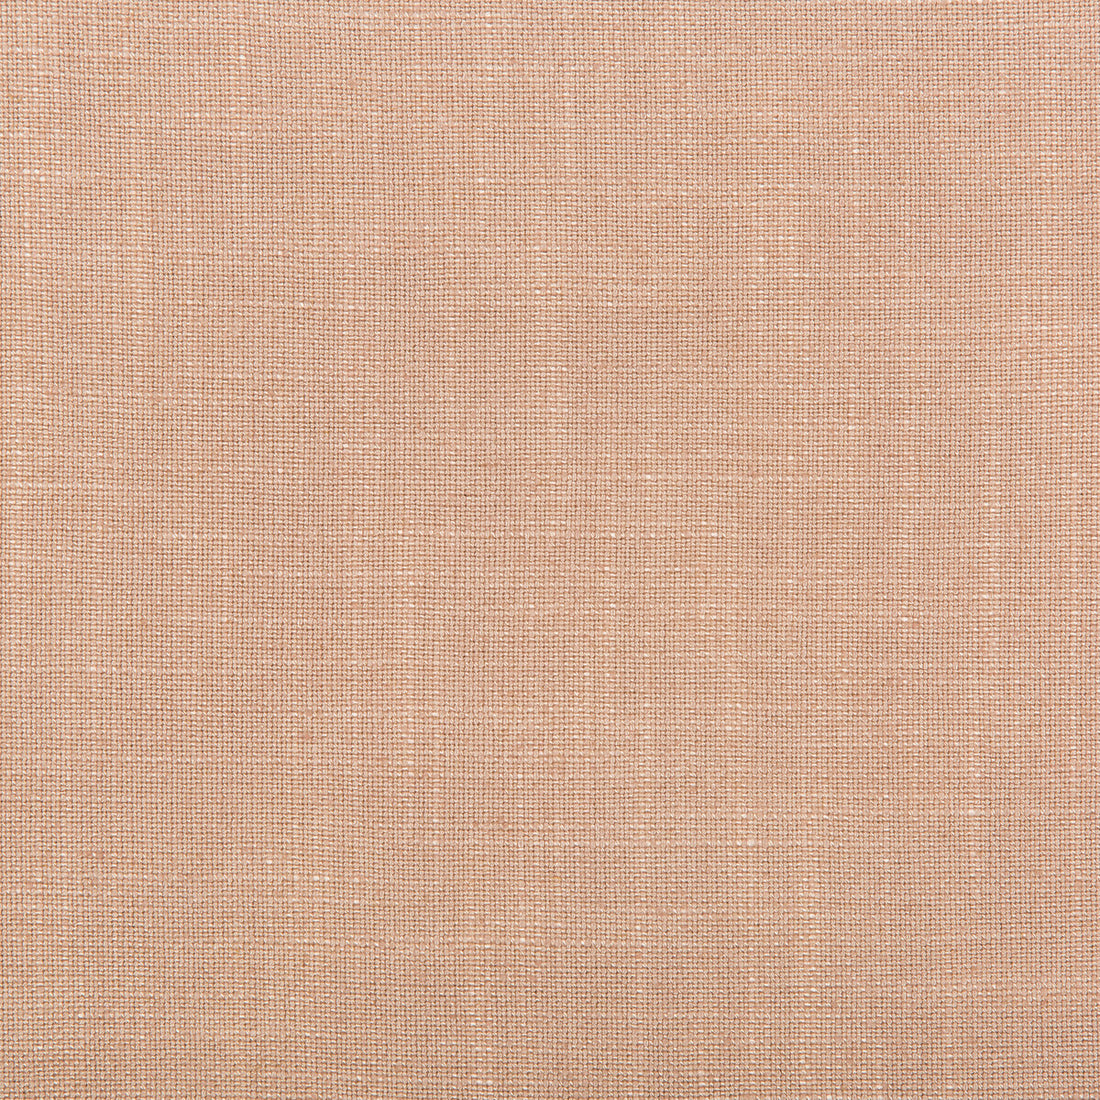 Aura fabric in nude color - pattern 35520.717.0 - by Kravet Design